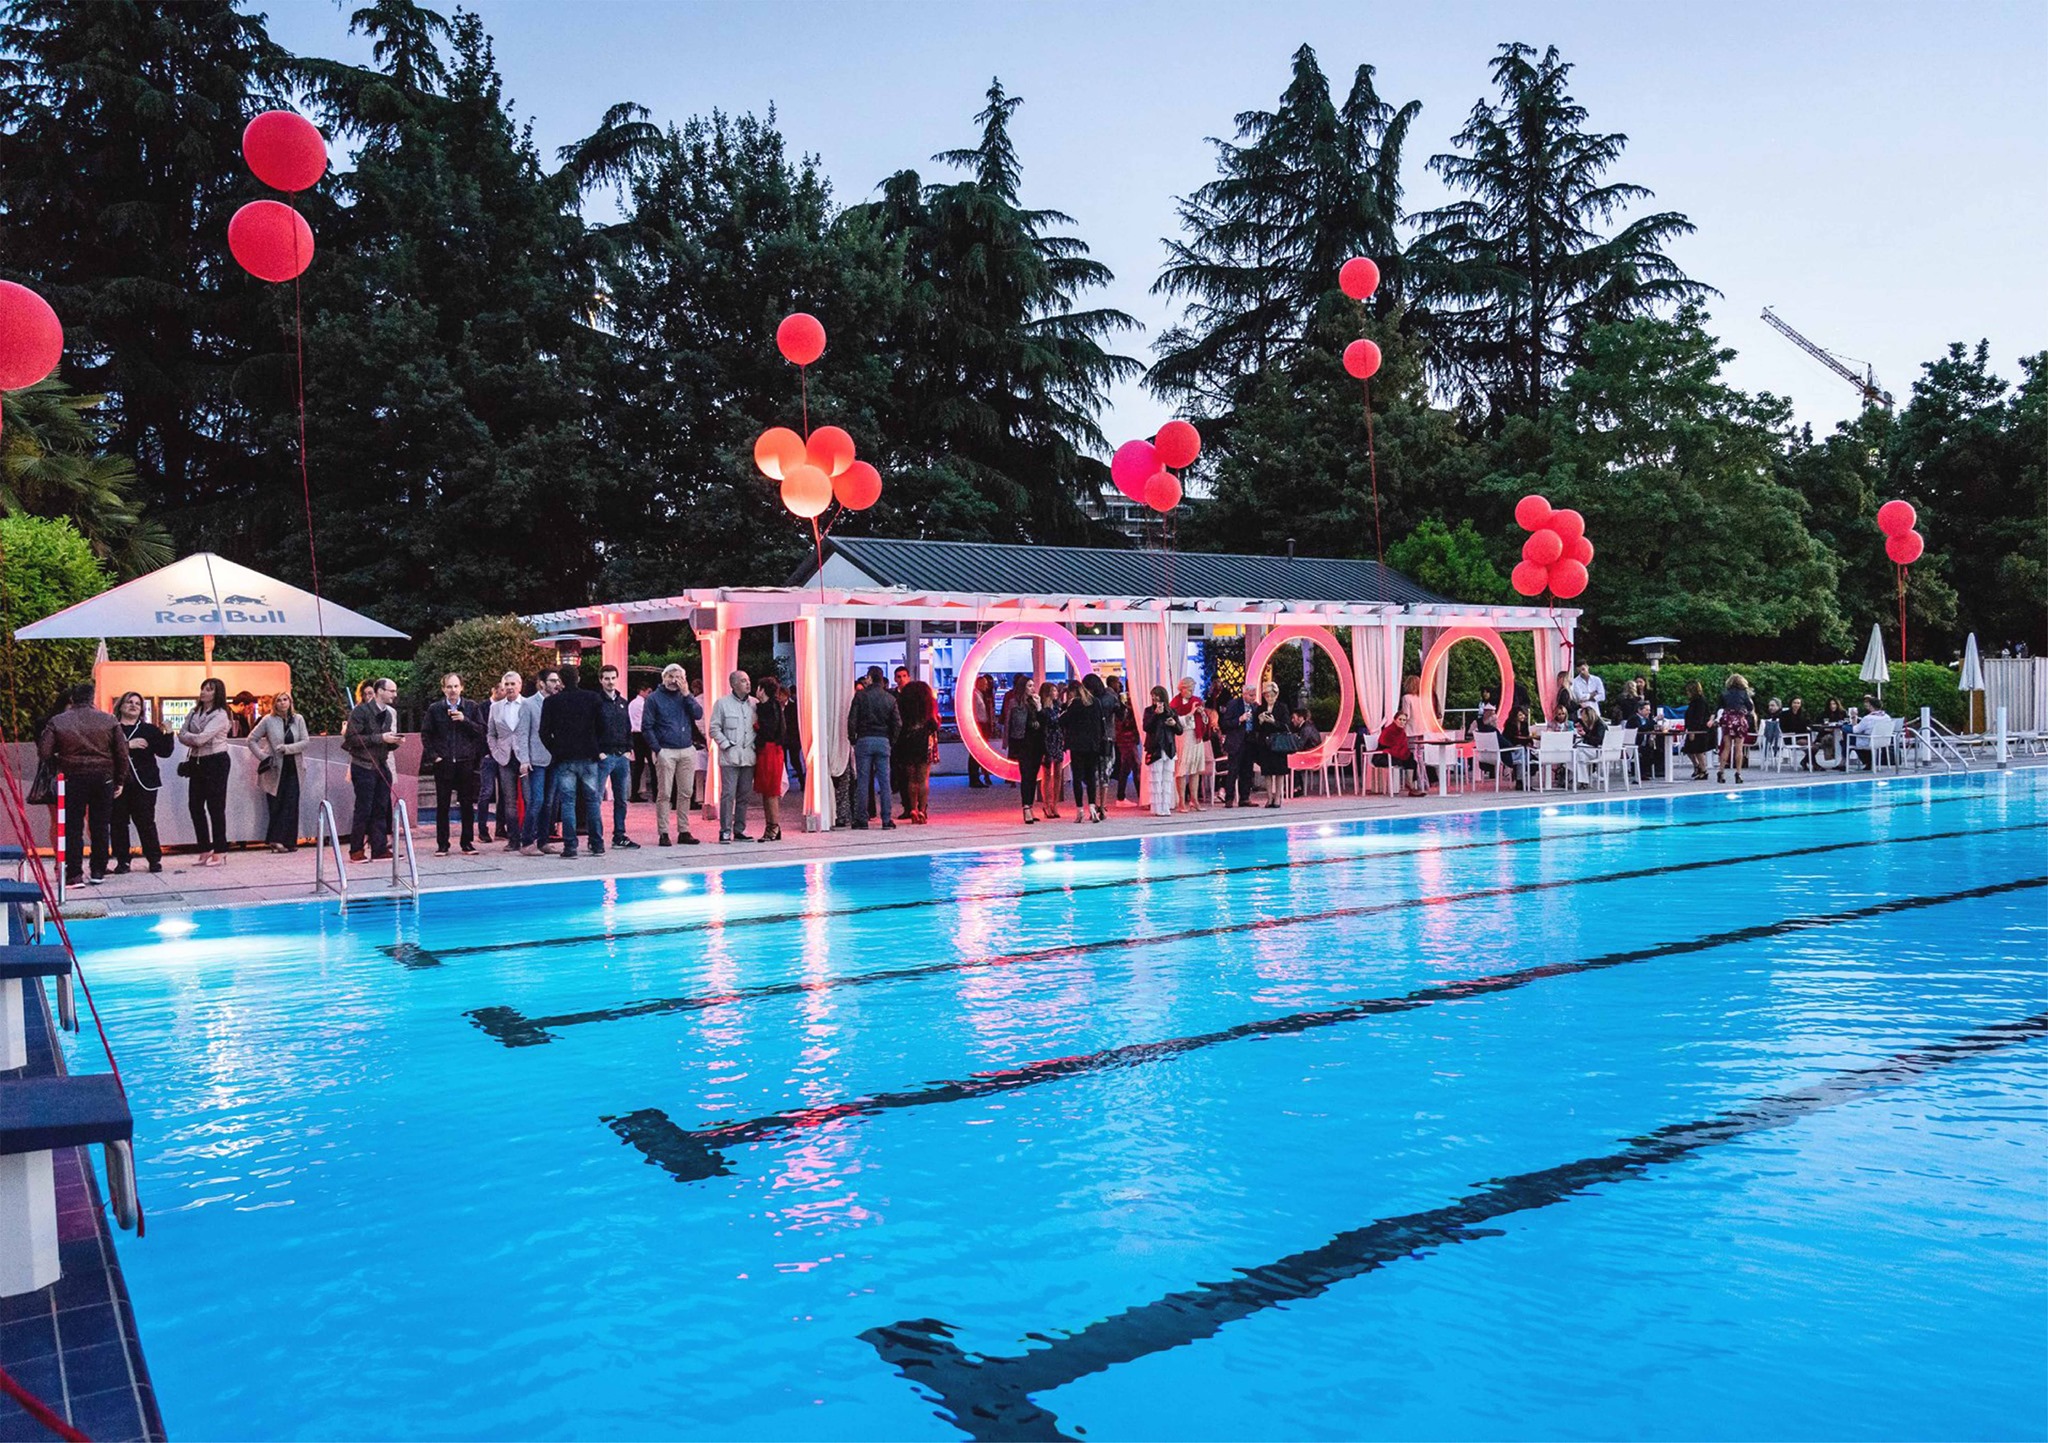 Big Pool Party - Rouge Carrousel powered by Red Bull | YOUparti Harbour Club Aspria Milano